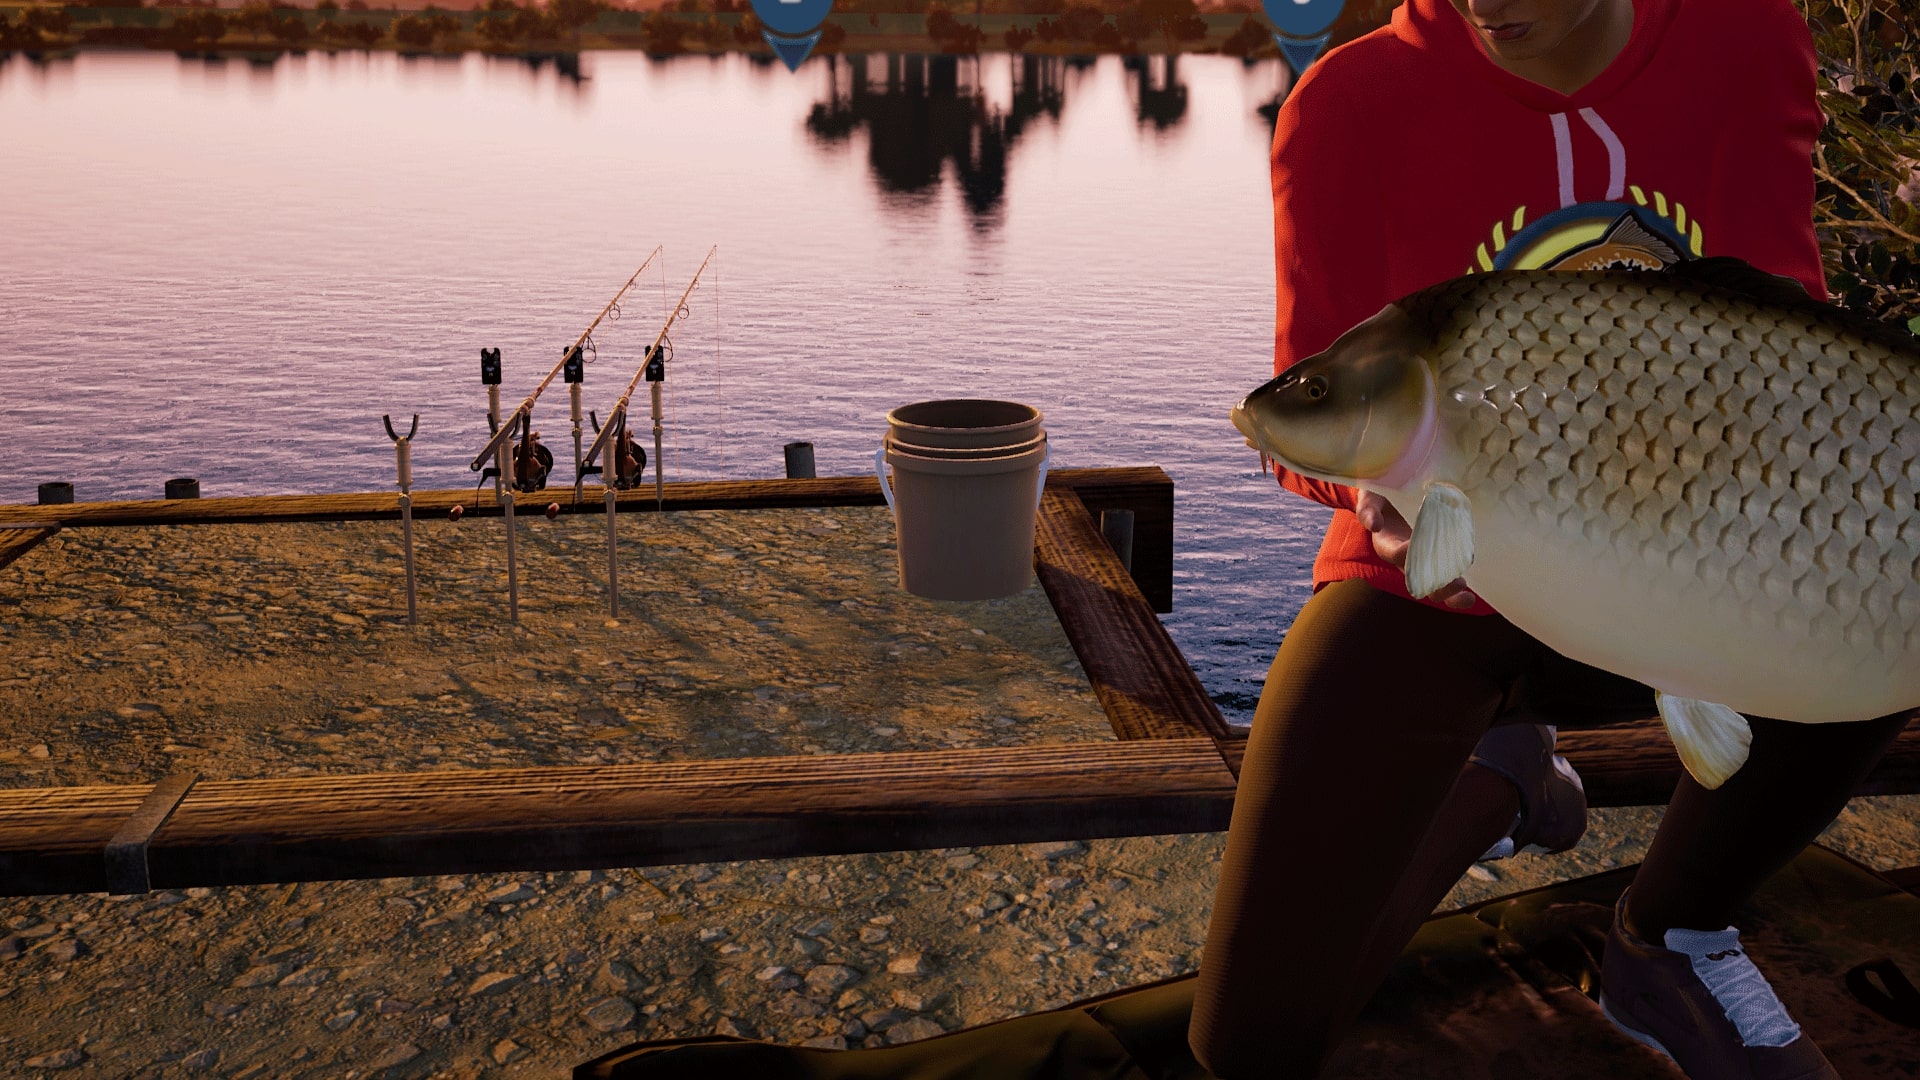 Up To Scale achievement in Fishing Sim World: Bass Pro Shops Edition